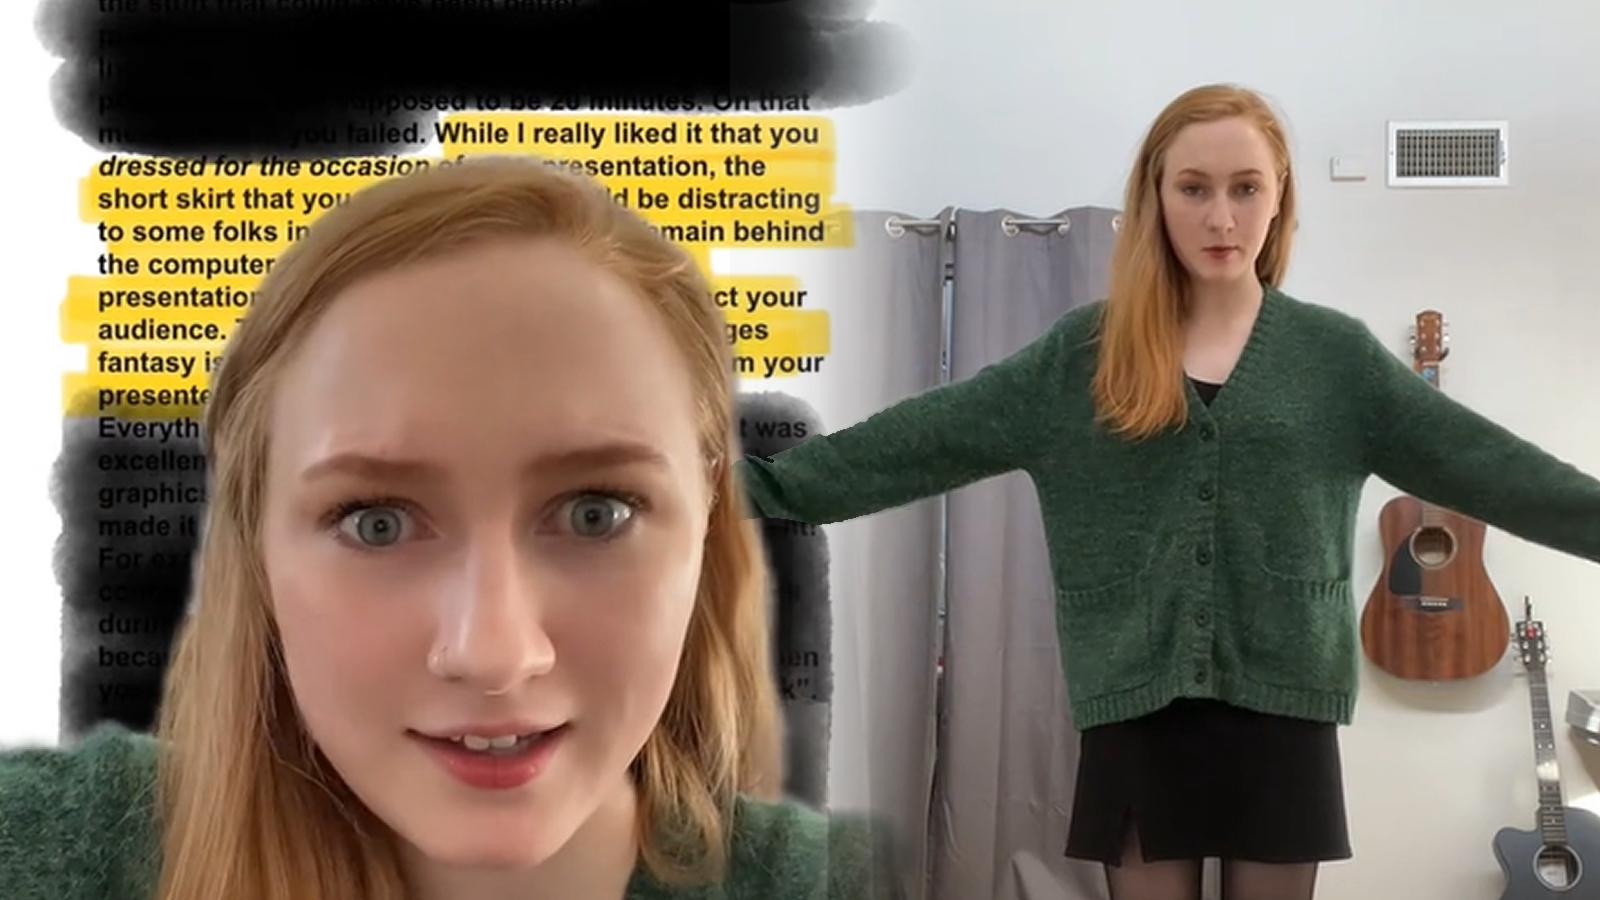 Student disgusted after professor states her attire encourages fantasy